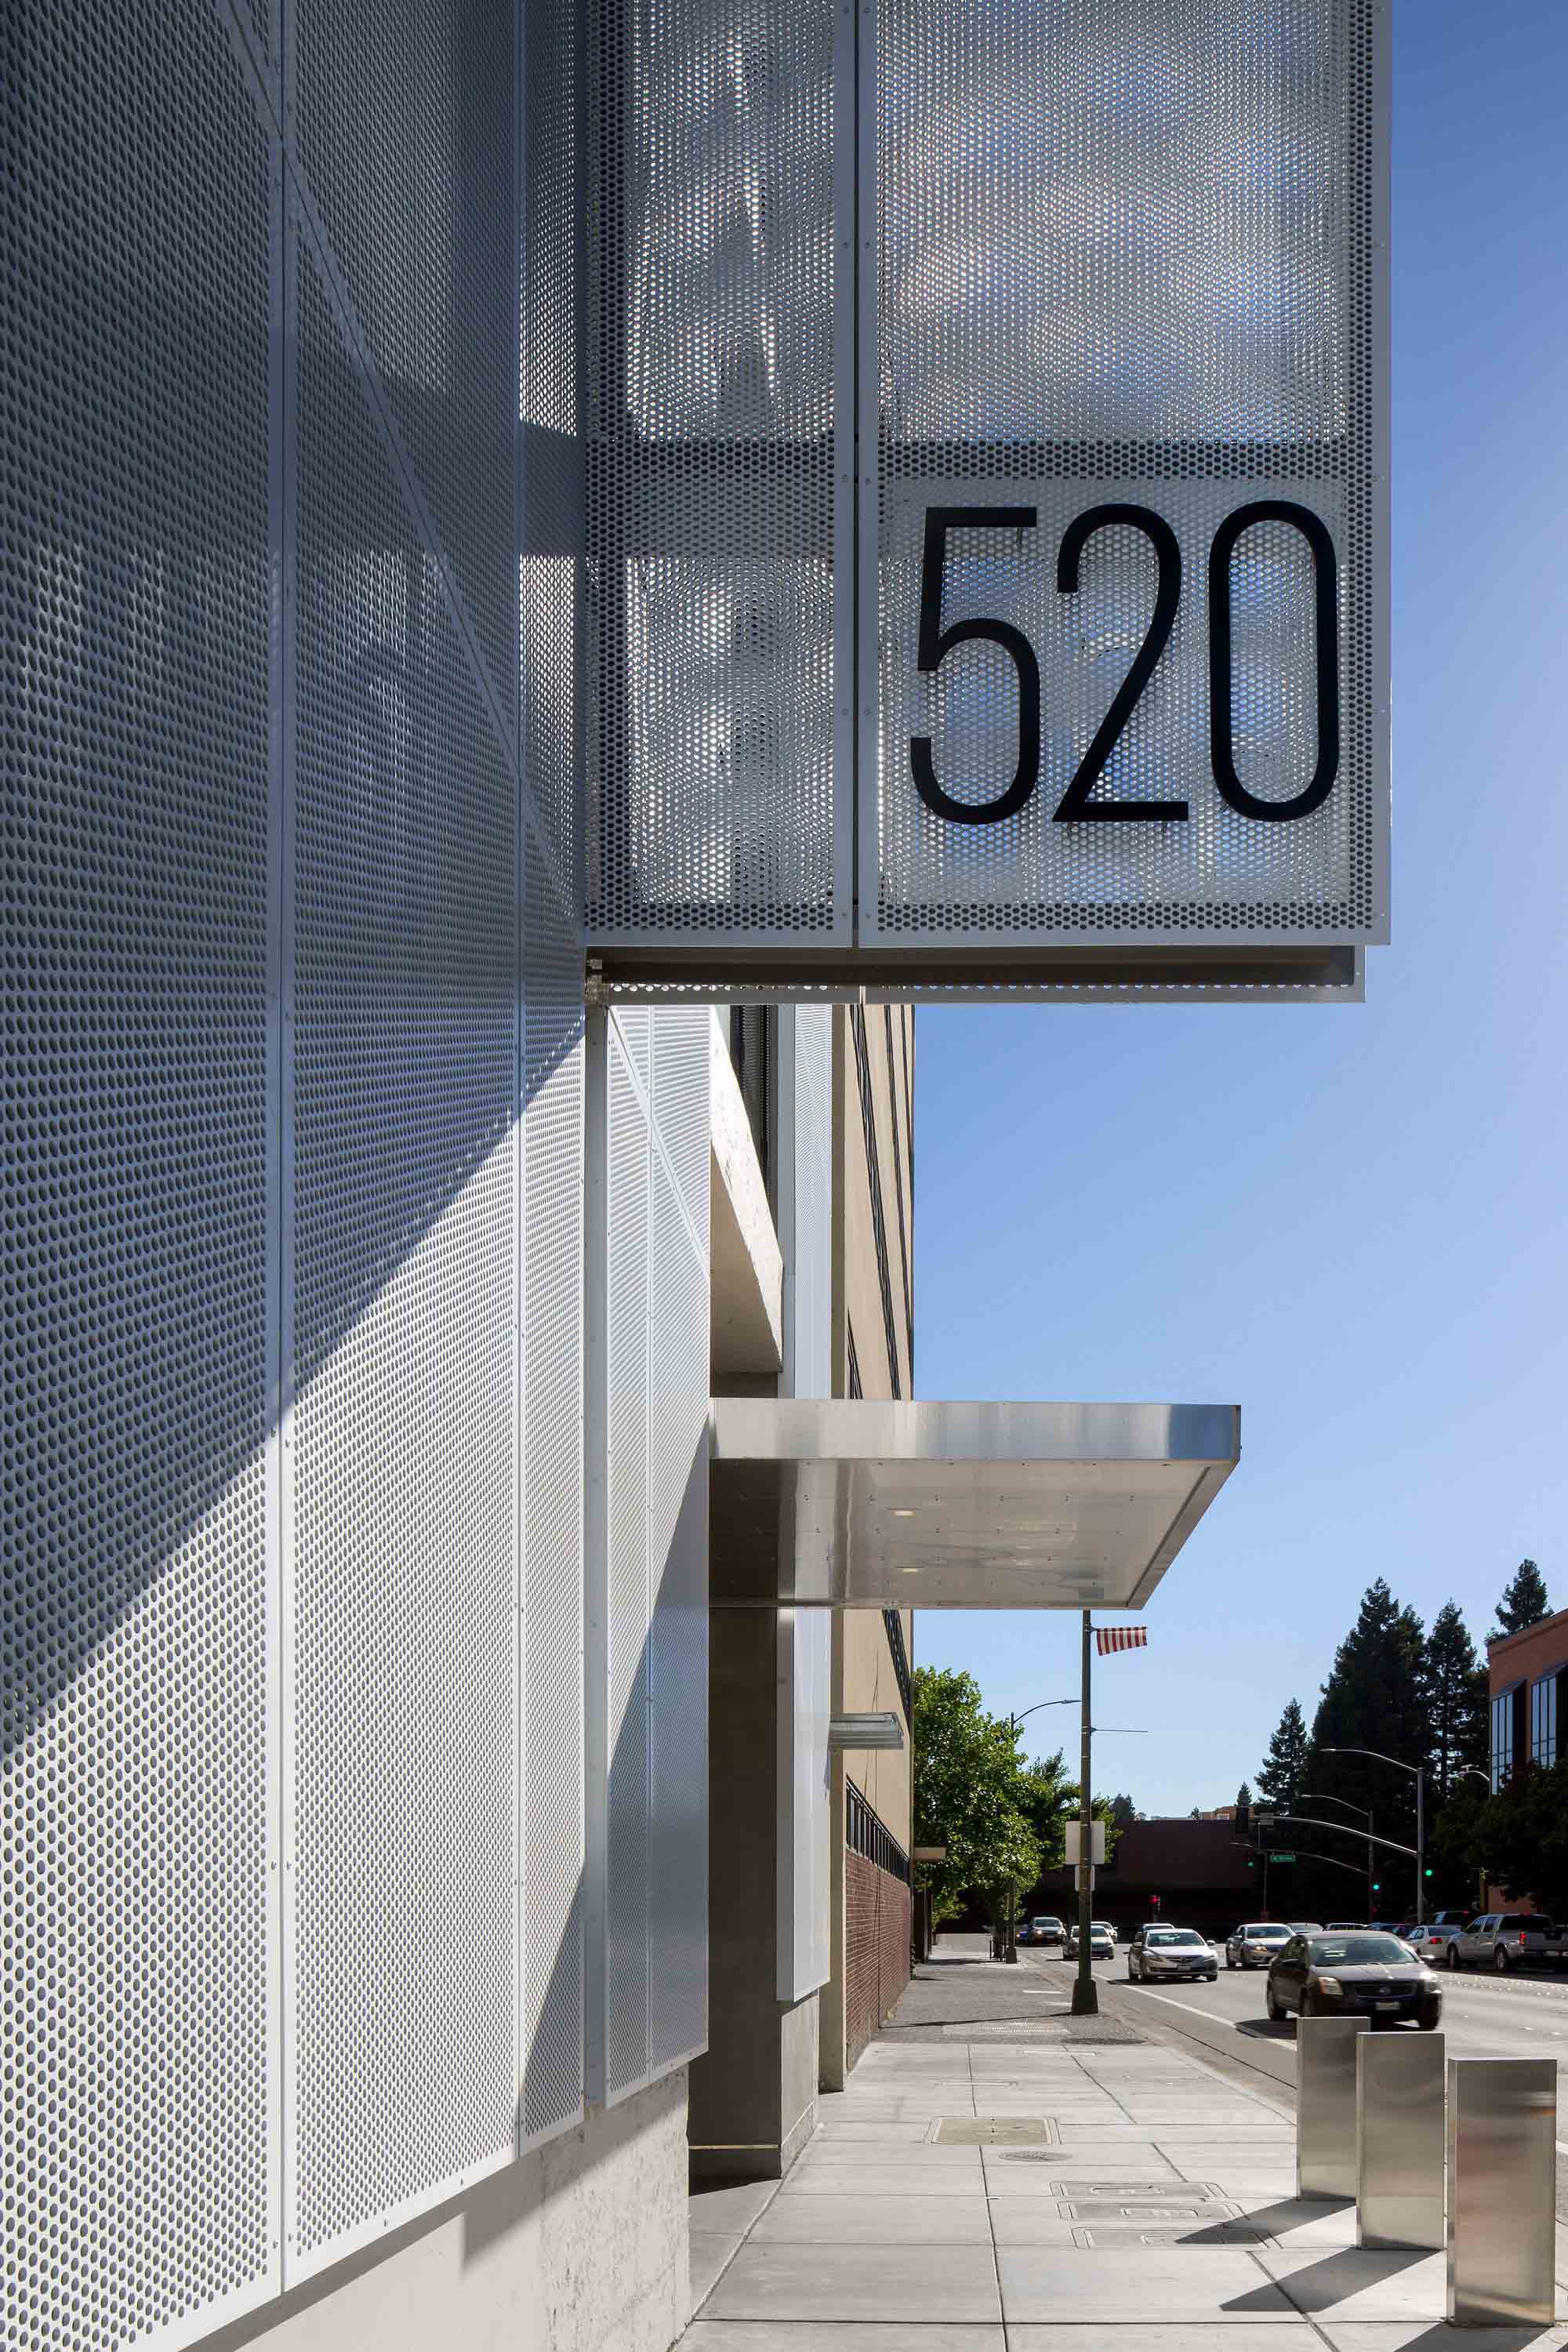 A '520' Perforated Metal sign representing the address number for the building.